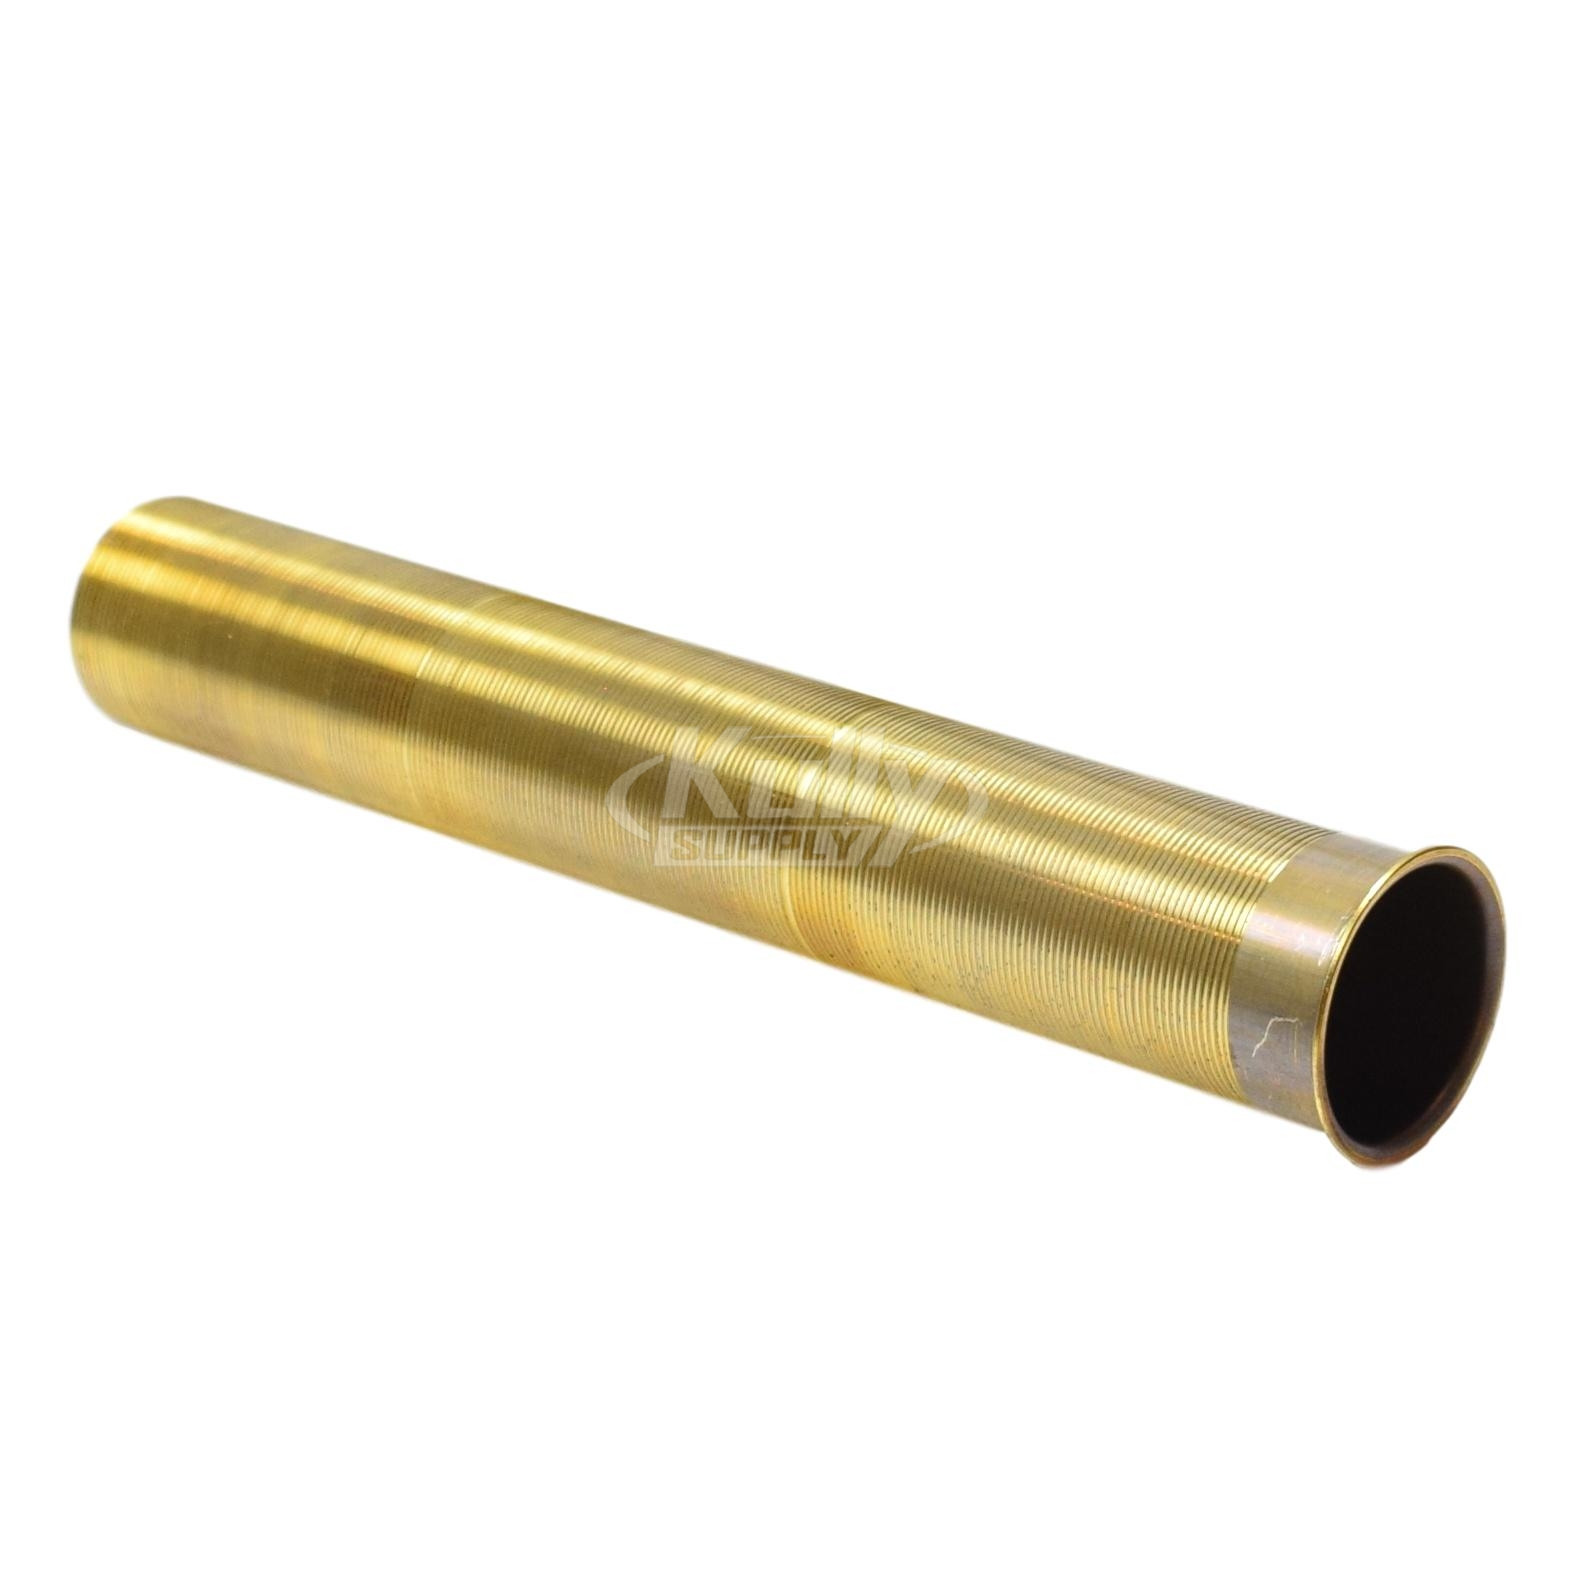 Sloan F-100 Rough Brass Outlet 1-1/2" x 9-1/2" (with 9" Score)